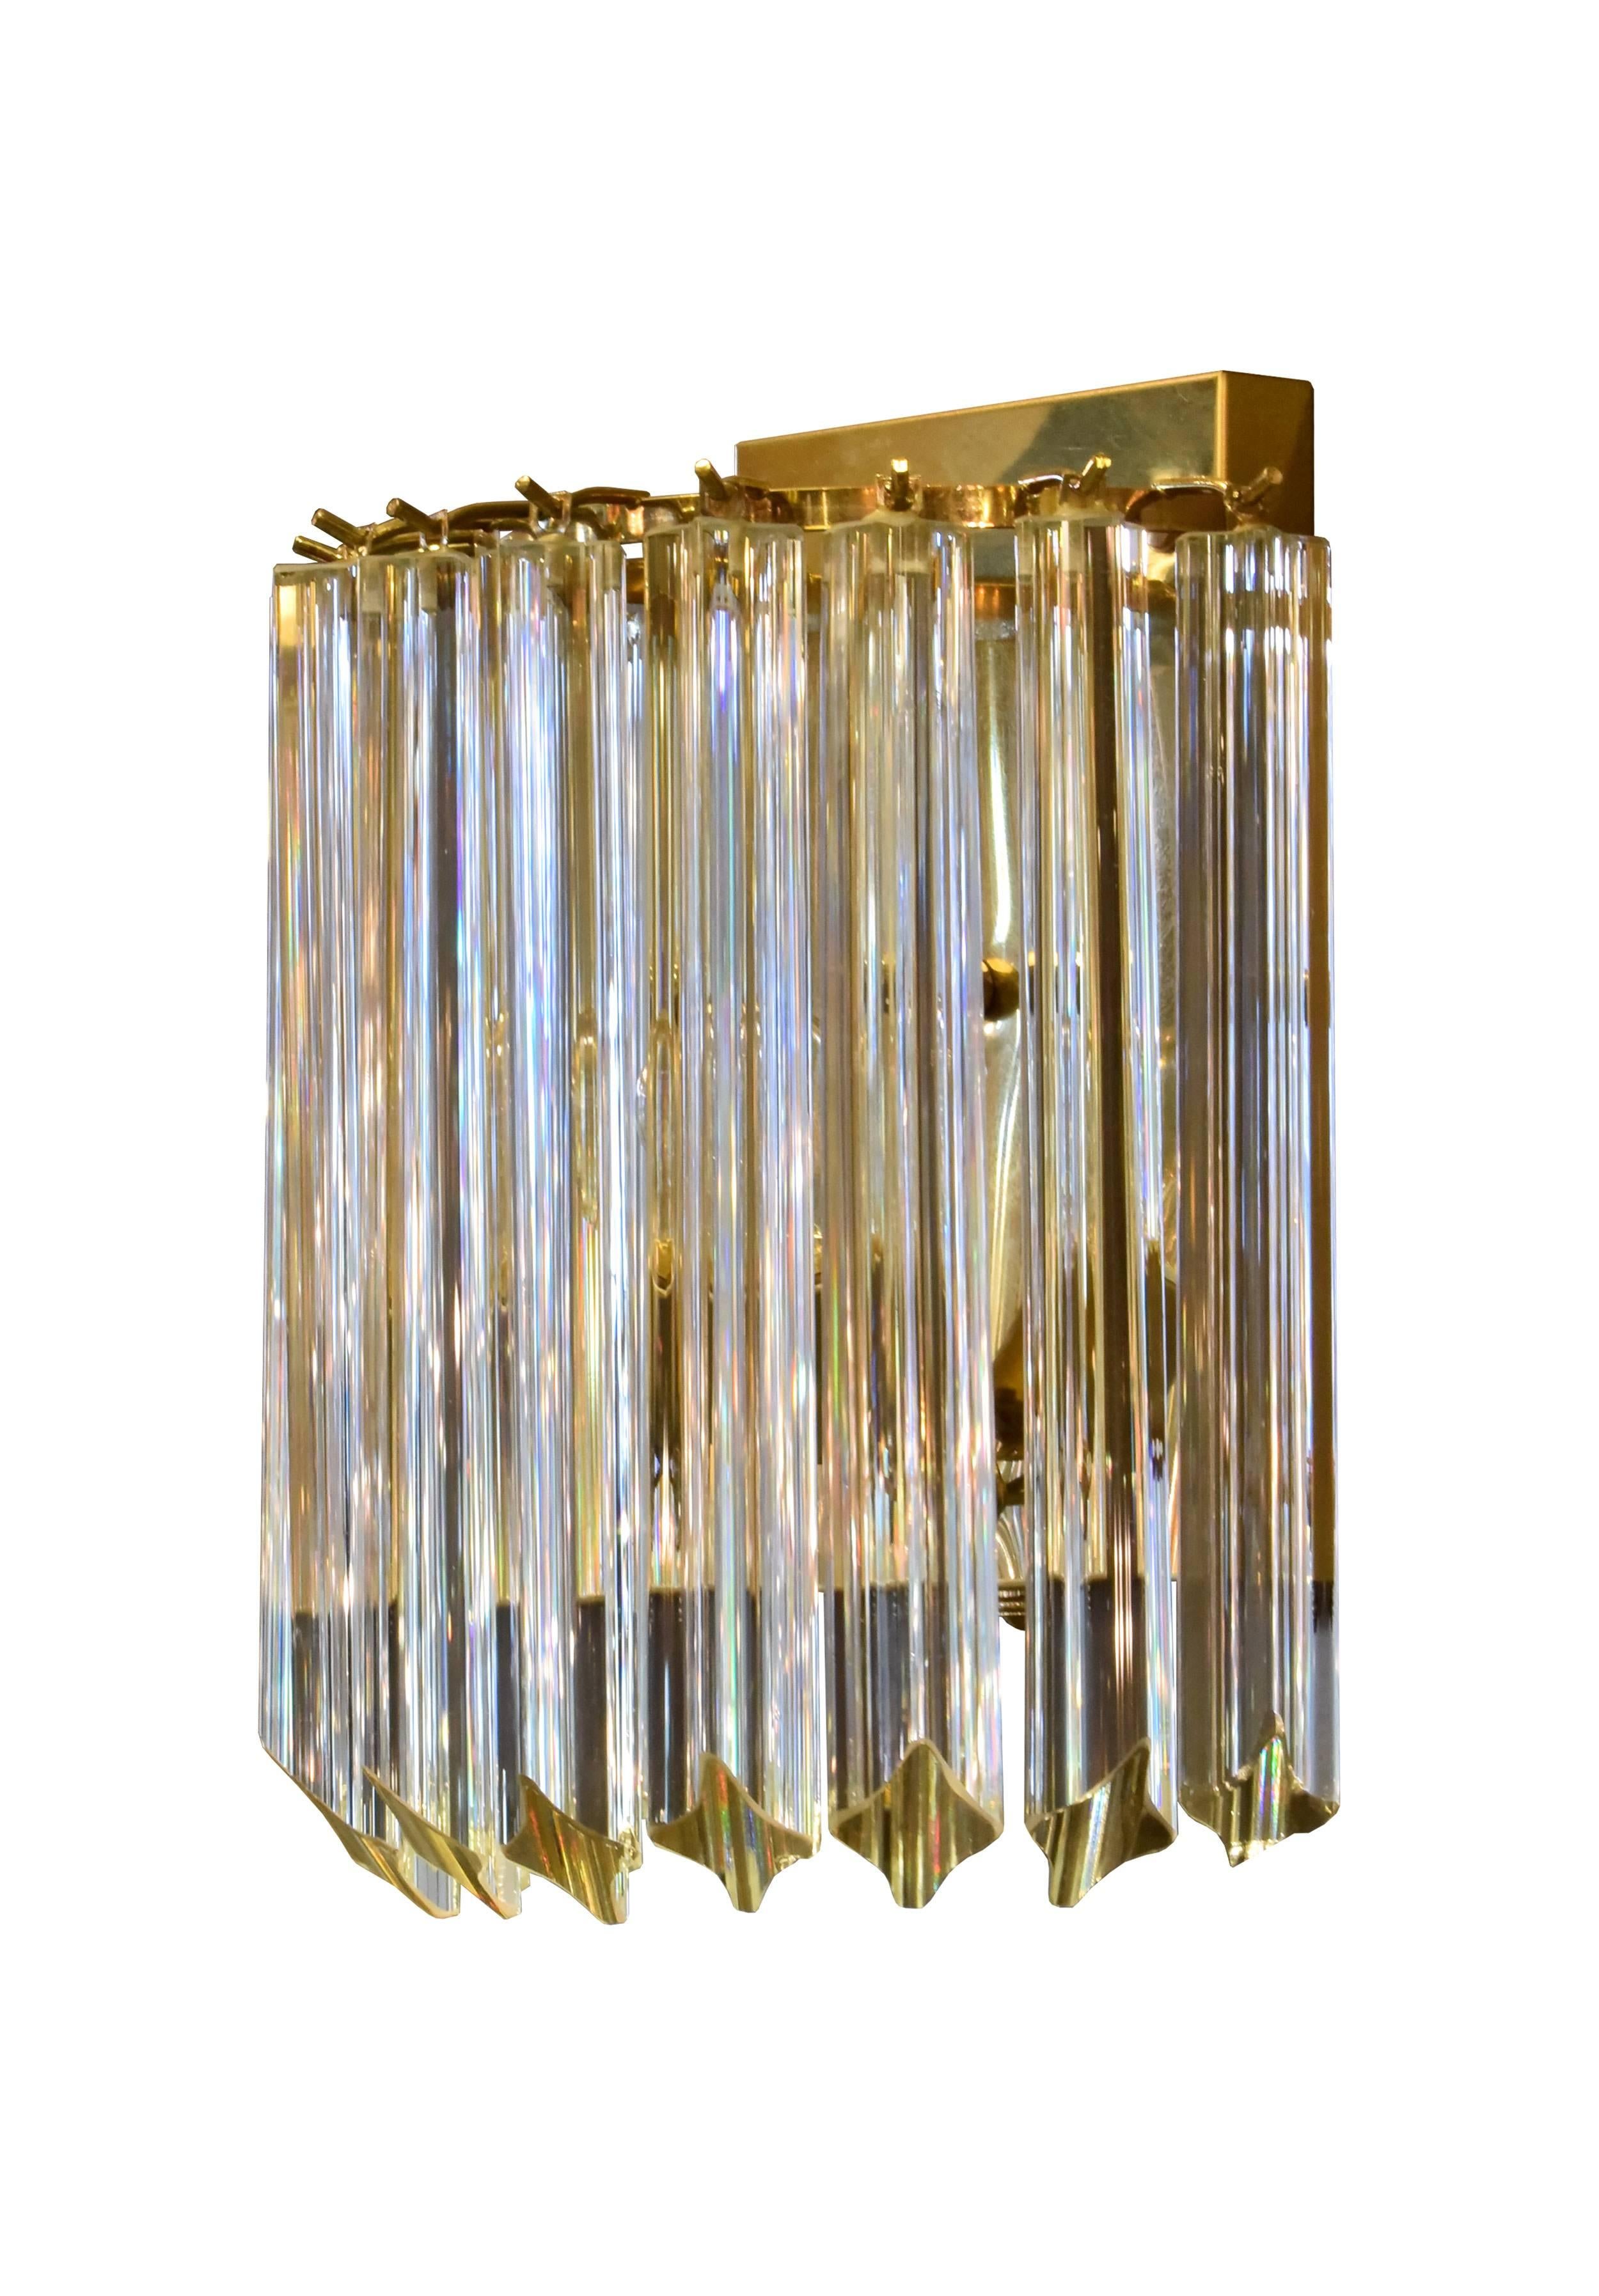 Long, hanging Triedri crystals drape luxuriously from the shiny brass back plate of this Venini sconce. The crystals are weighty and exceptionally crafted, and they reflect the warm, rich tones of the interior light when illuminated. Two available, 